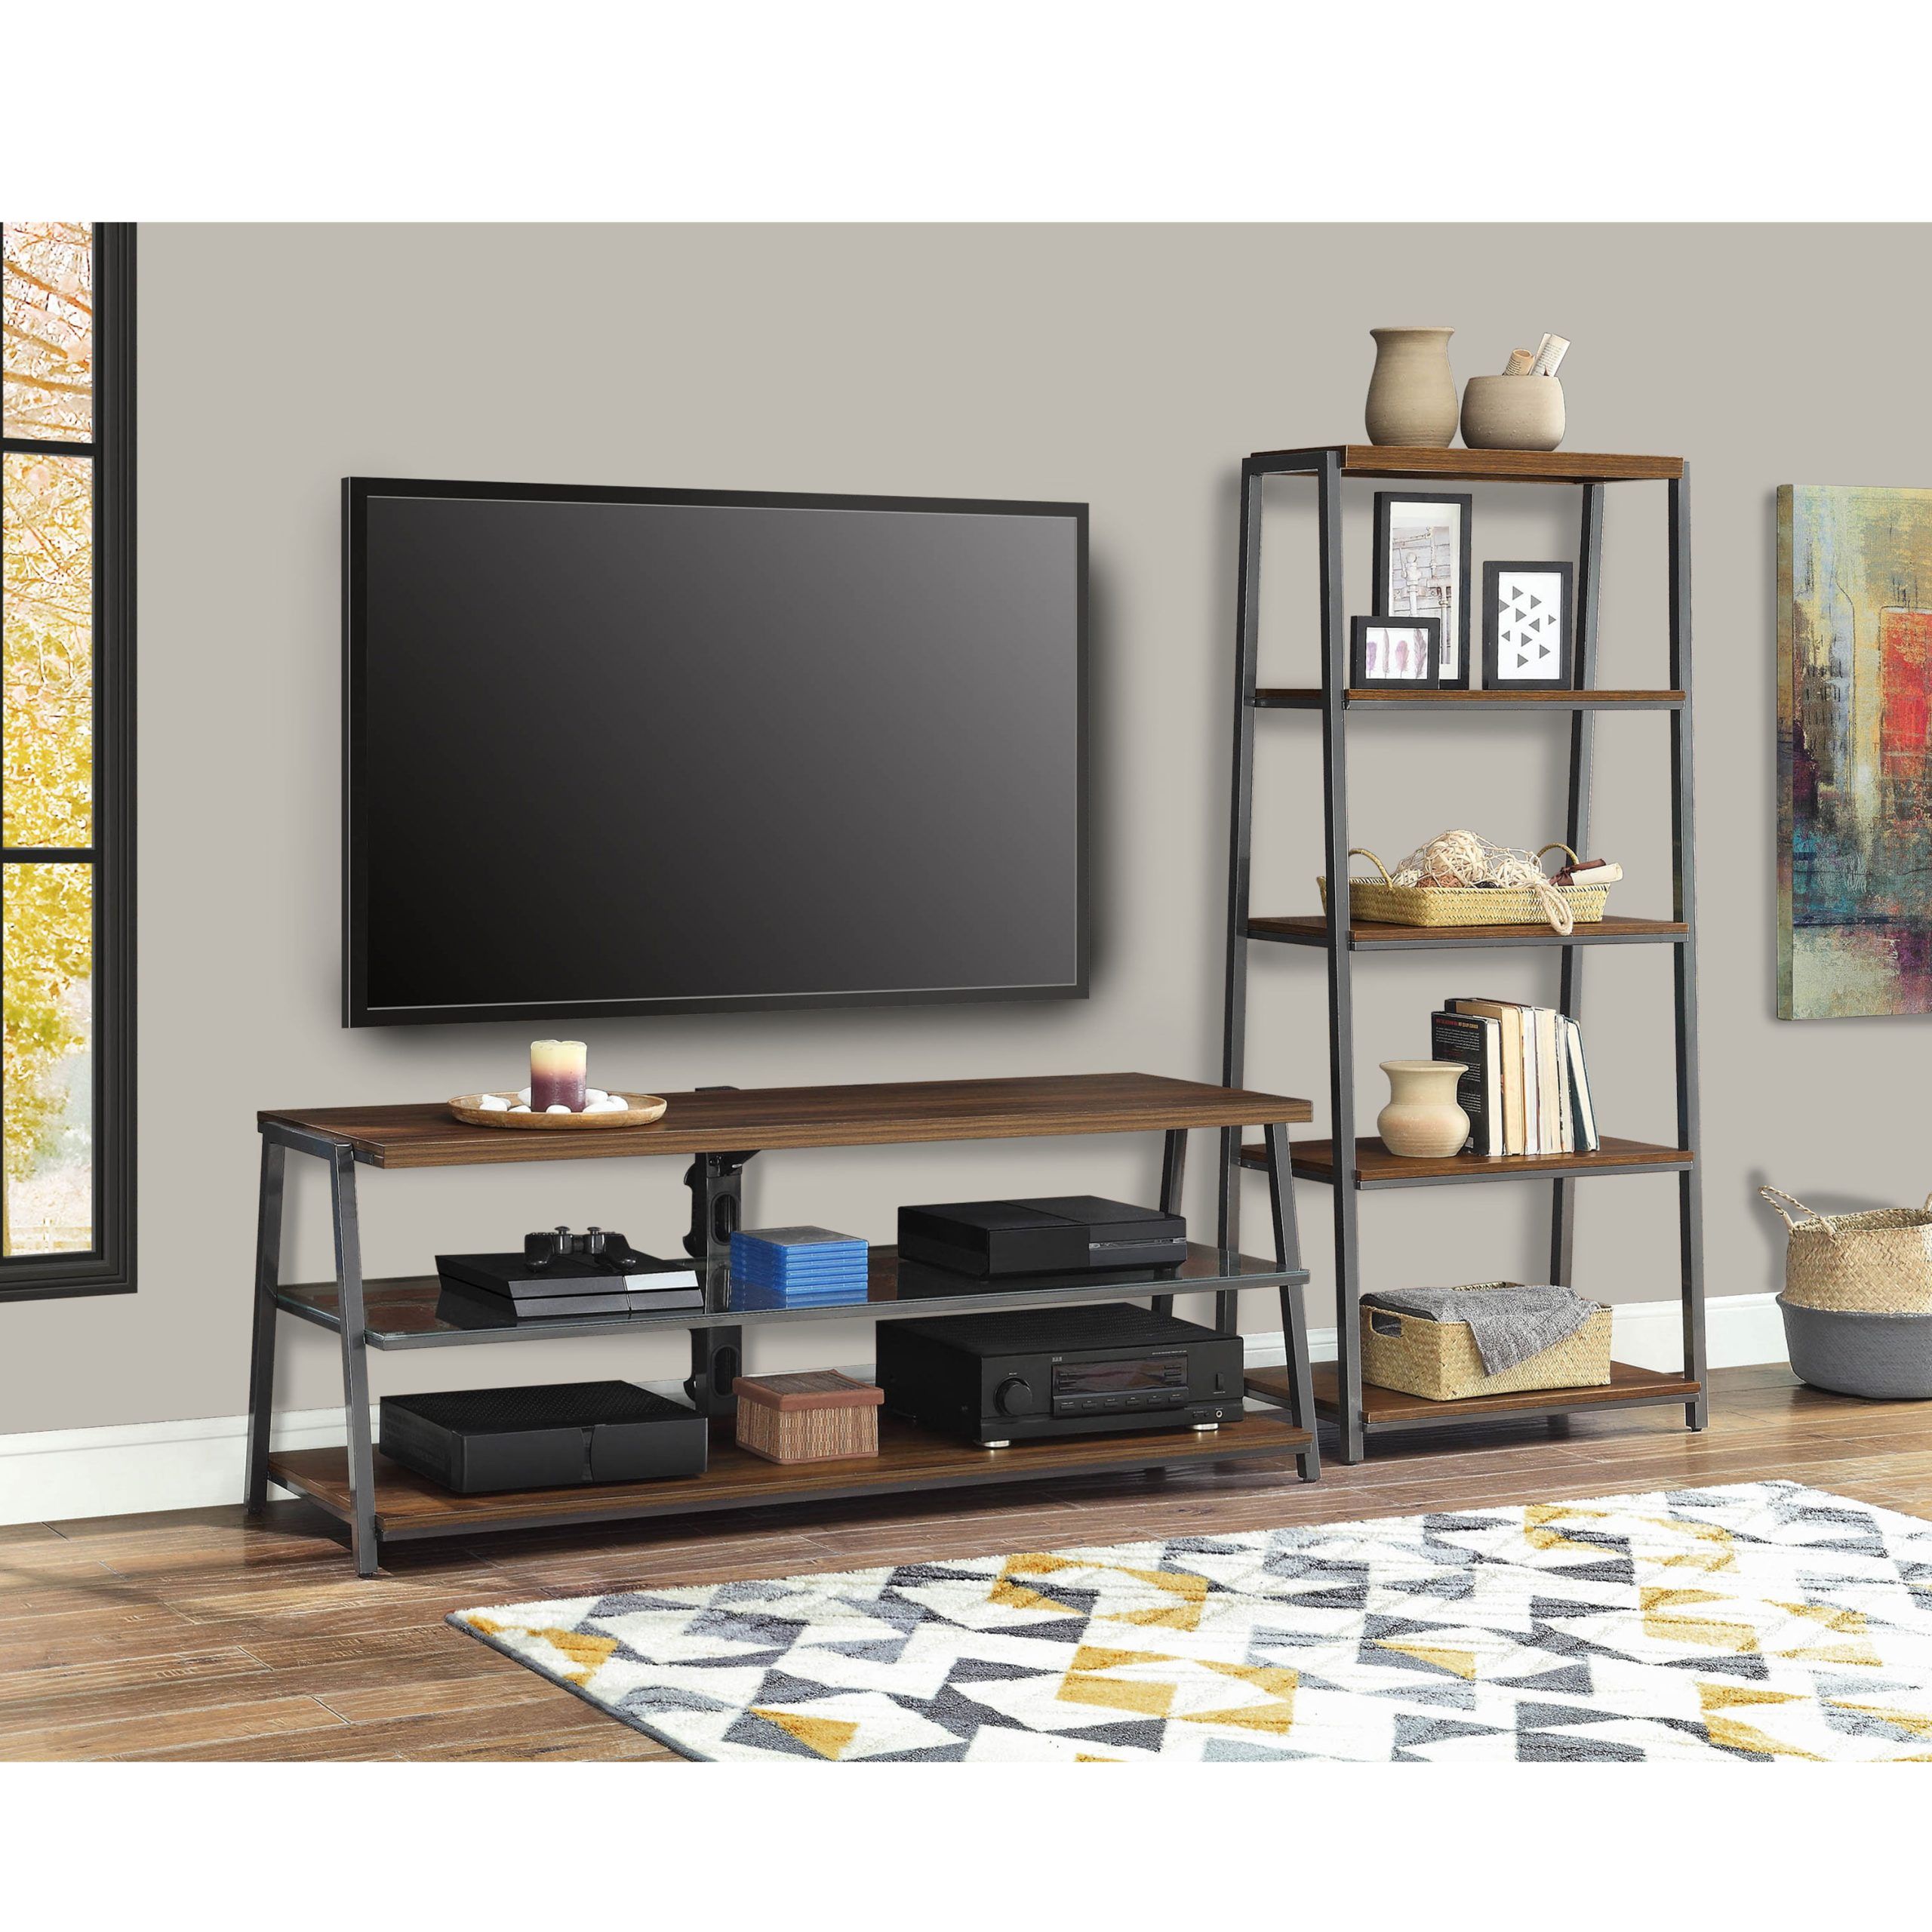 Mainstays Arris Tv Stand For 70" Flat Panel Tvs And 4 Shelf Tower Book Inside Top Shelf Mount Tv Stands (View 9 of 20)